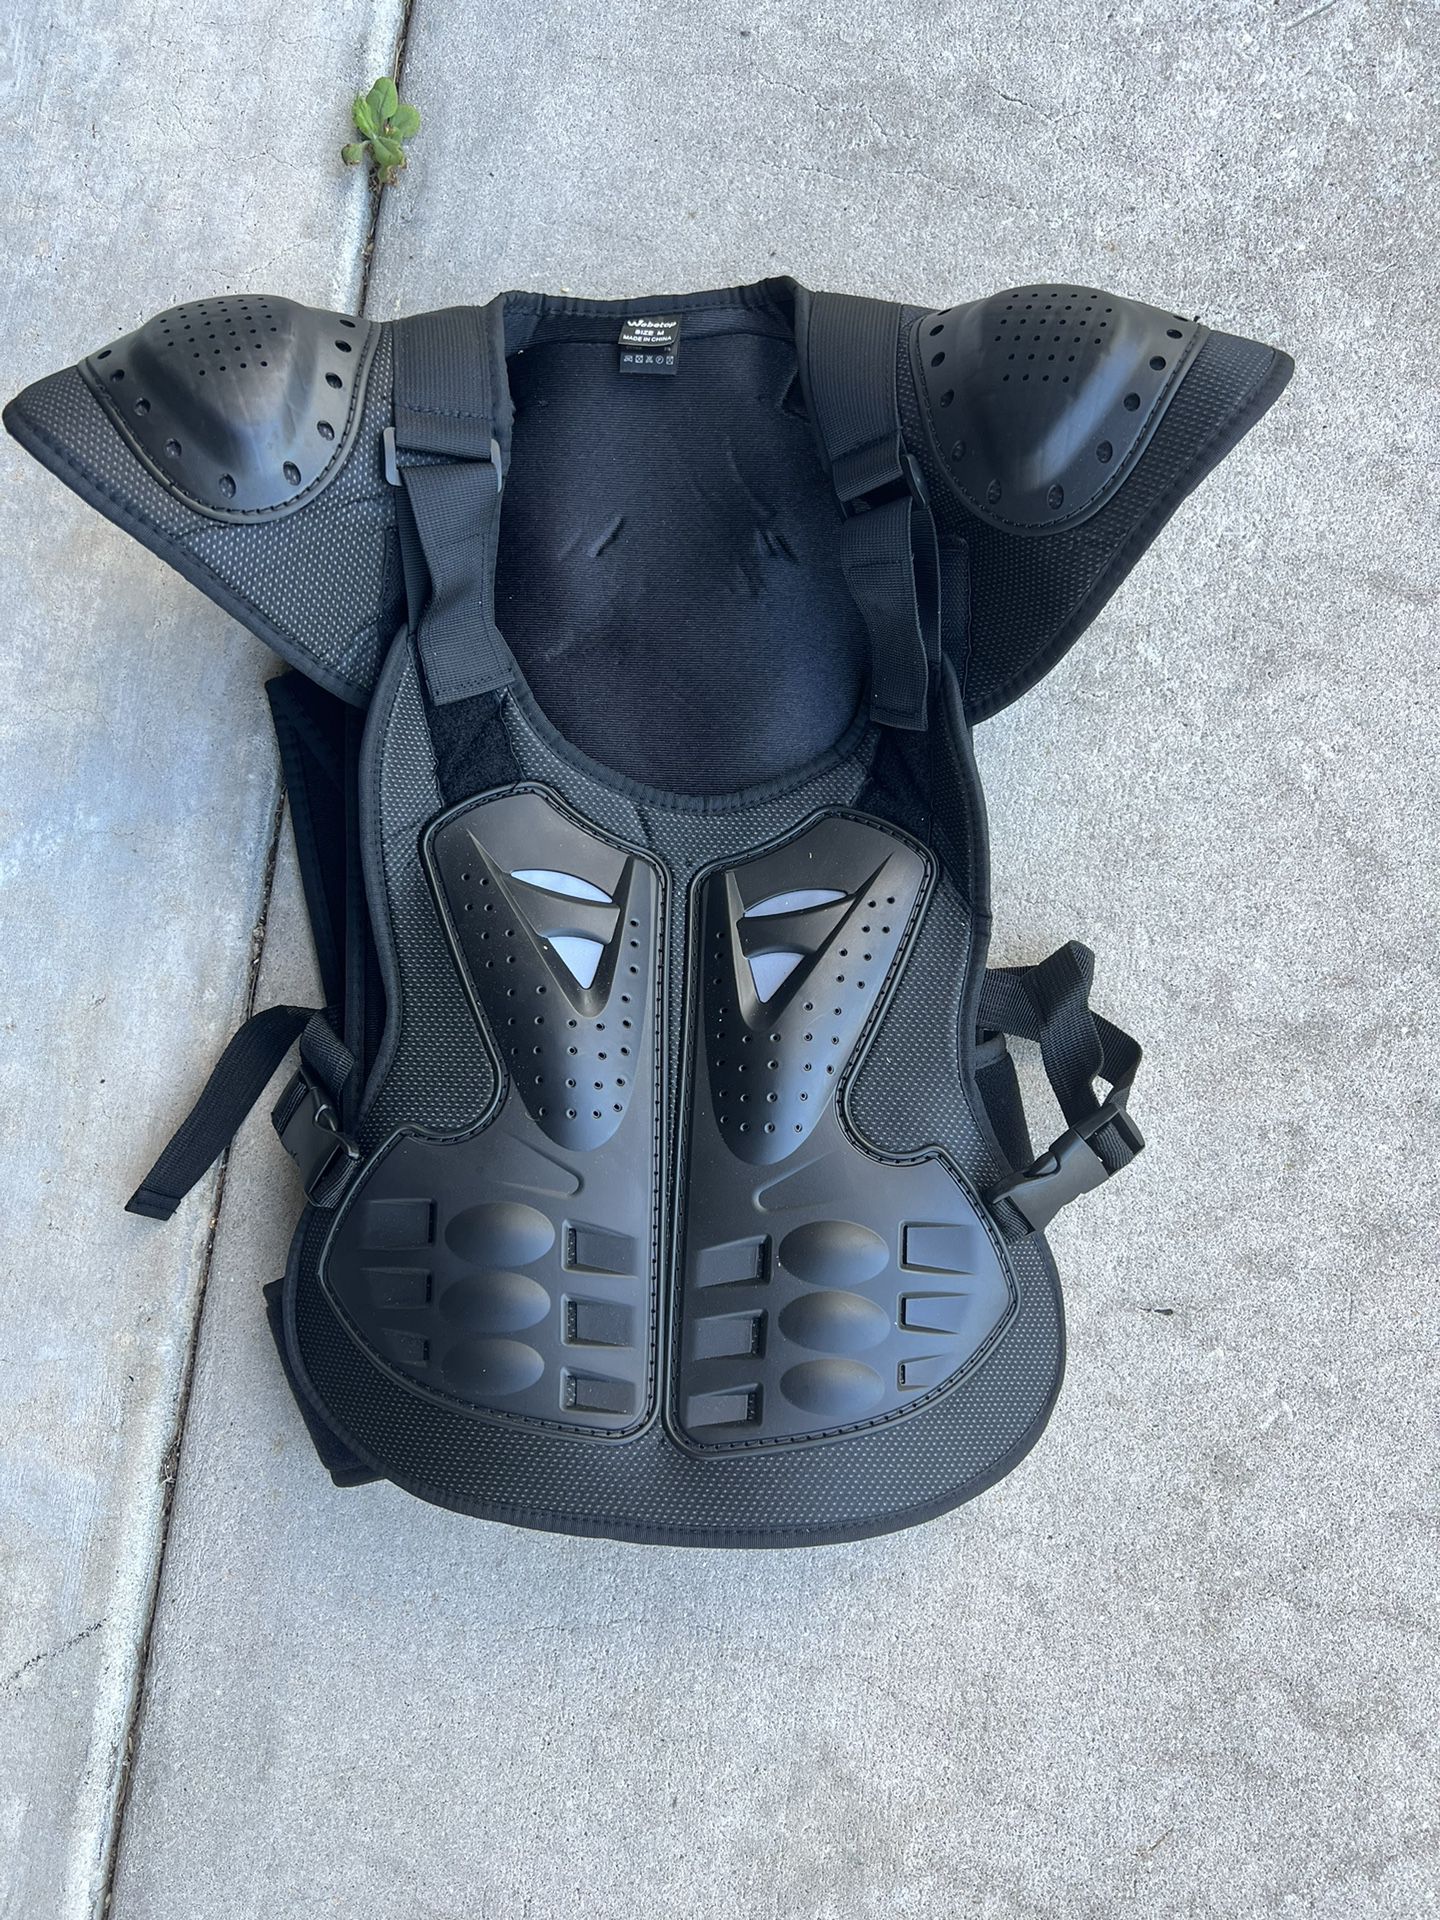 Dirt Bike Body Chest Spine Protector